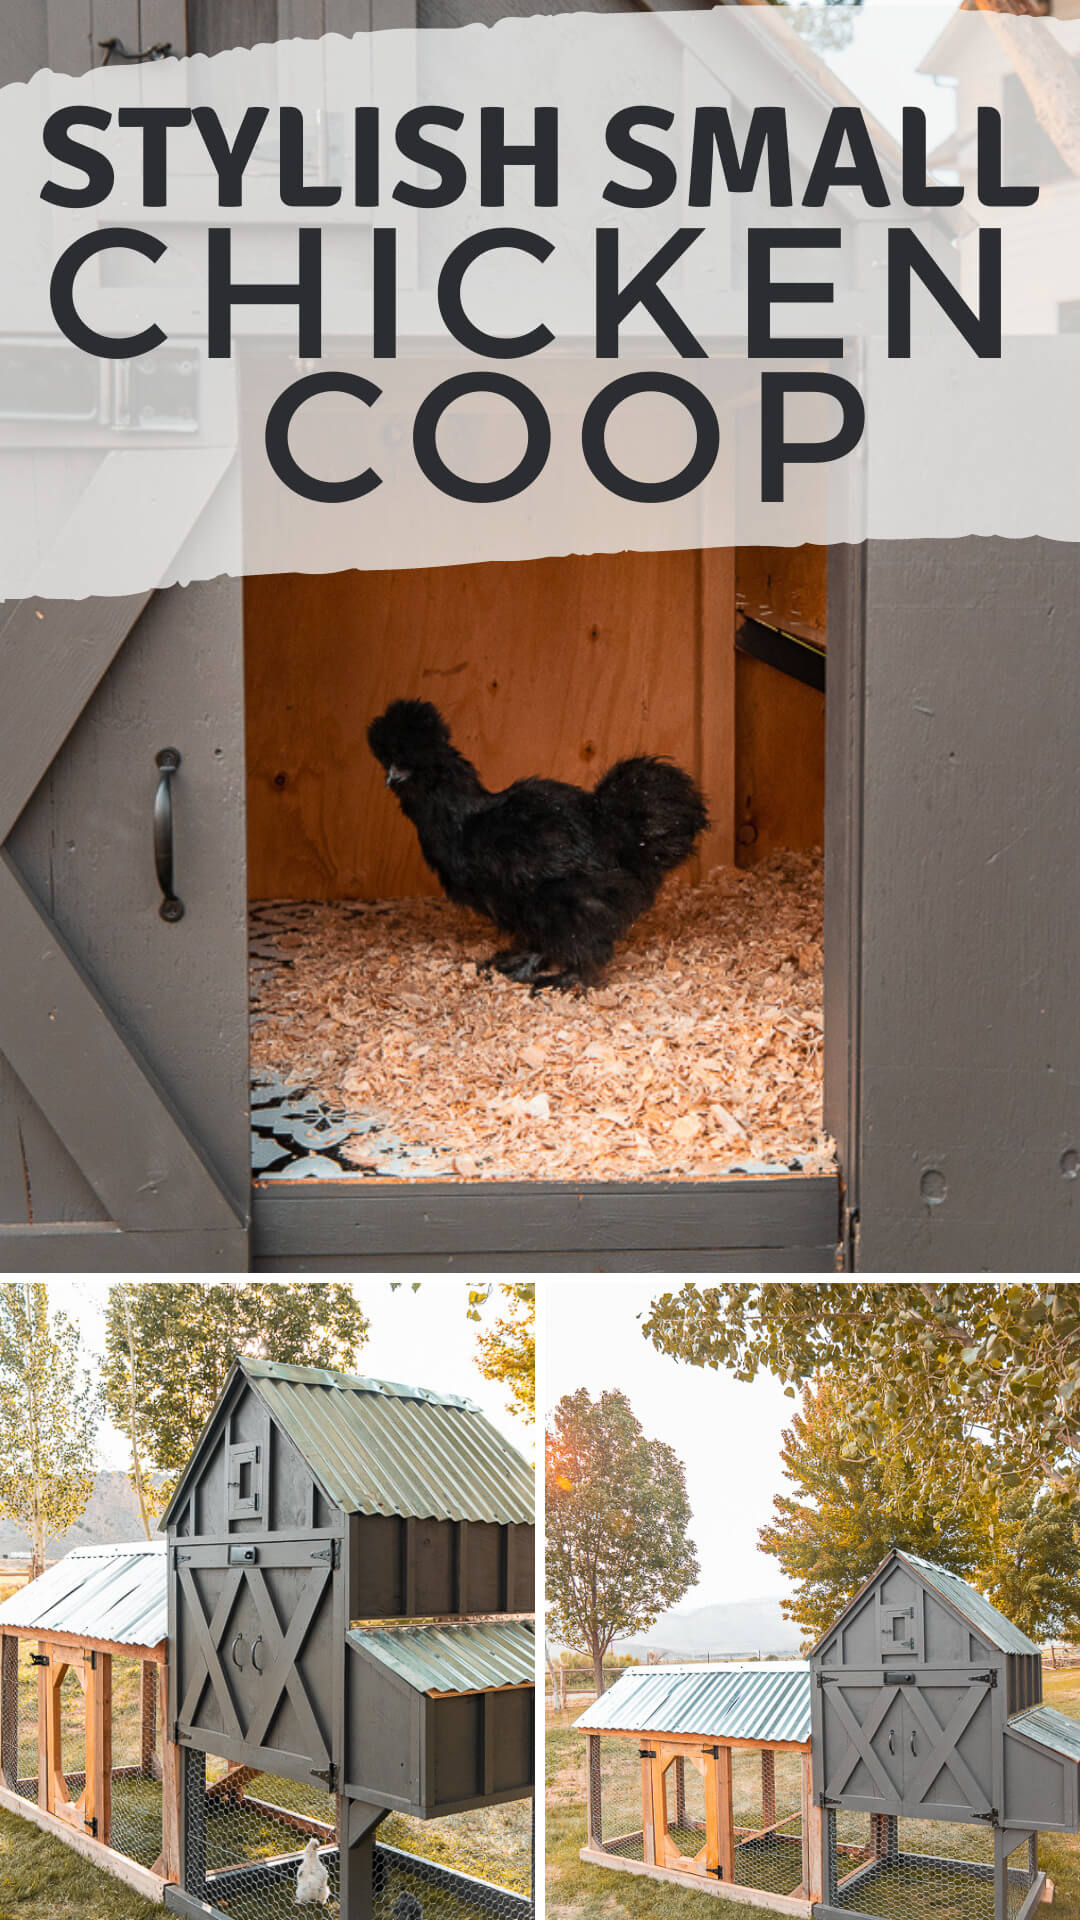 This small chicken coop is the newest addition to the farm. It is adorable and super functional with a removable floor, easy access and more! This chicken coop will house between 4-6 chickens in the coop. It has easy access to the eggs and nesting boxes. The coop is raised with a run underneath it. There are so many great features to this small chicken coop and to top it off it is stylish too!